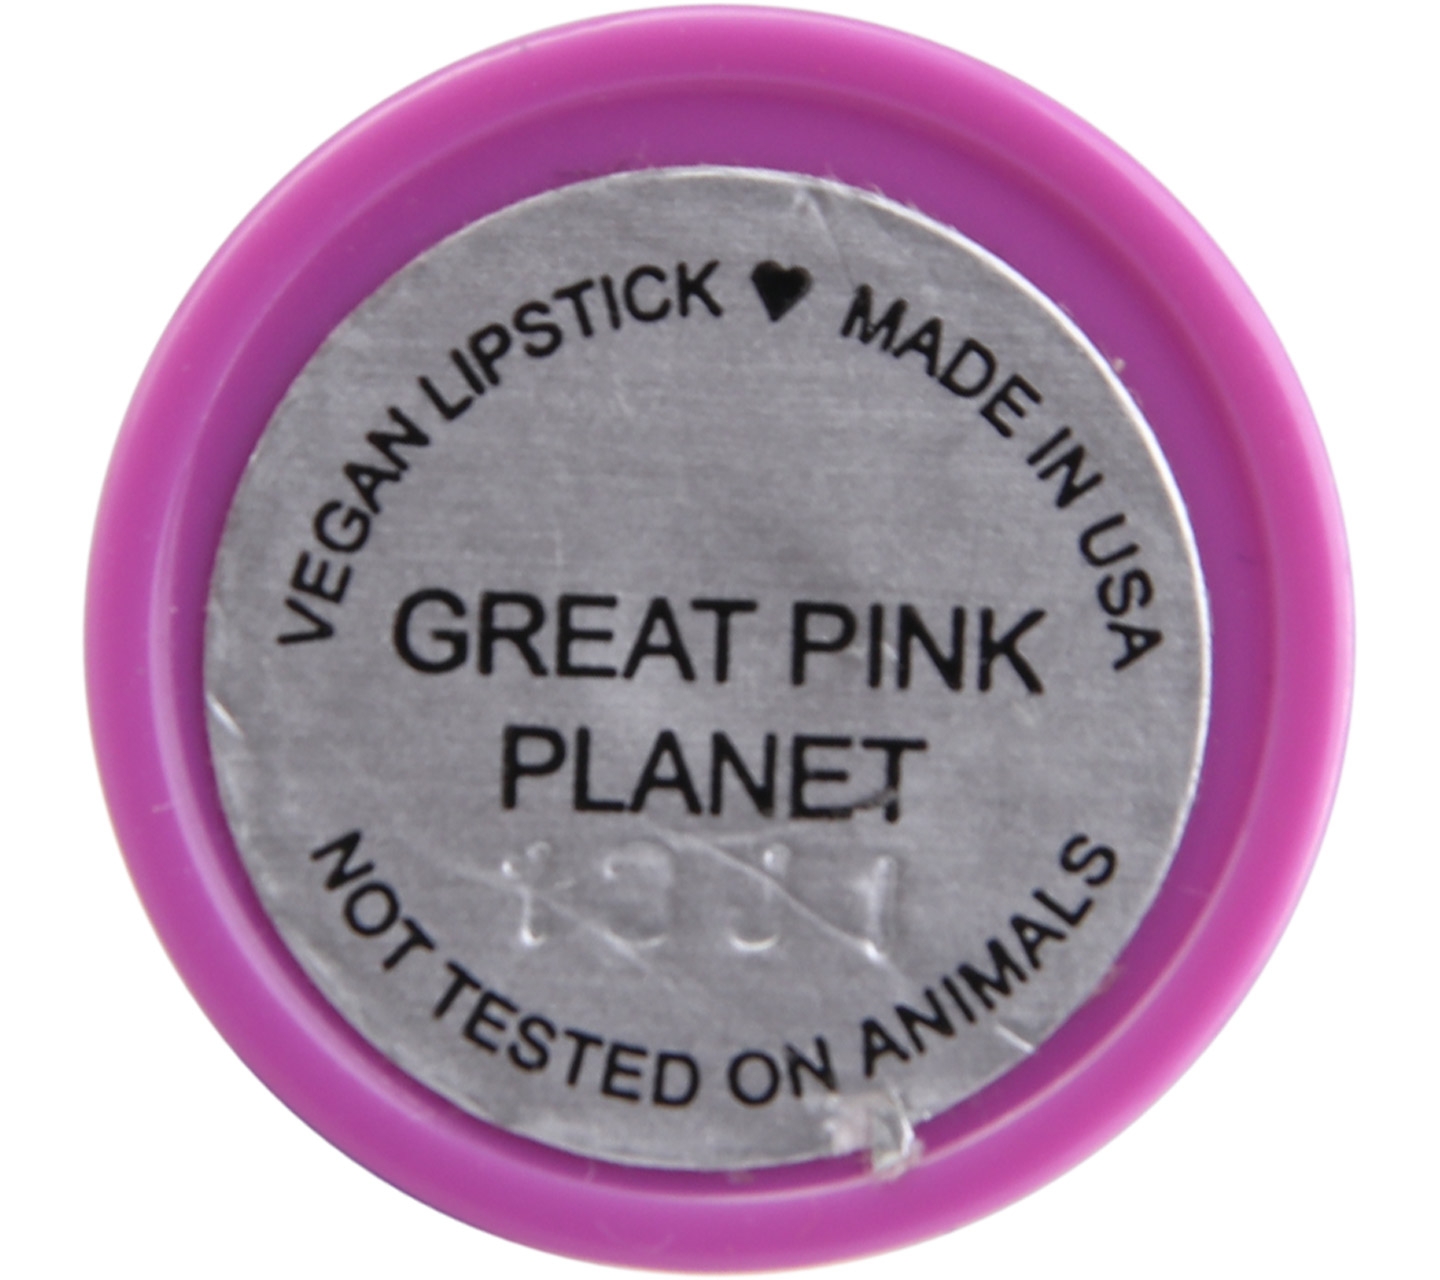 Lime Crime Great Pink Planet Lips